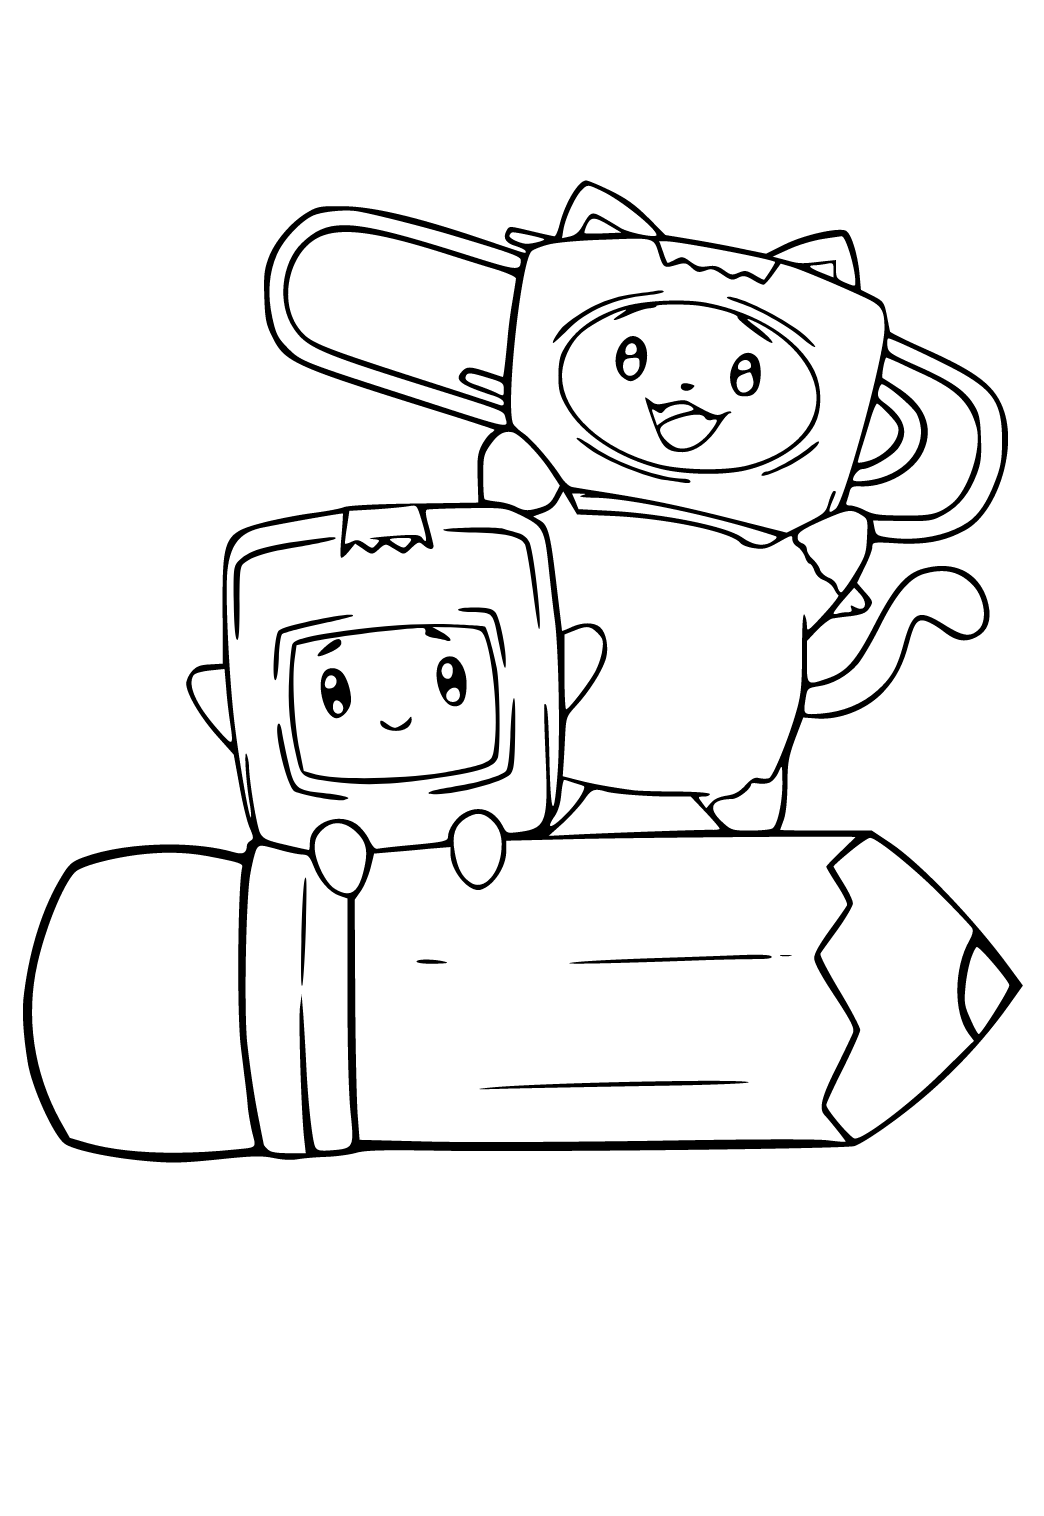 Free printable lankybox pencil coloring page for adults and kids